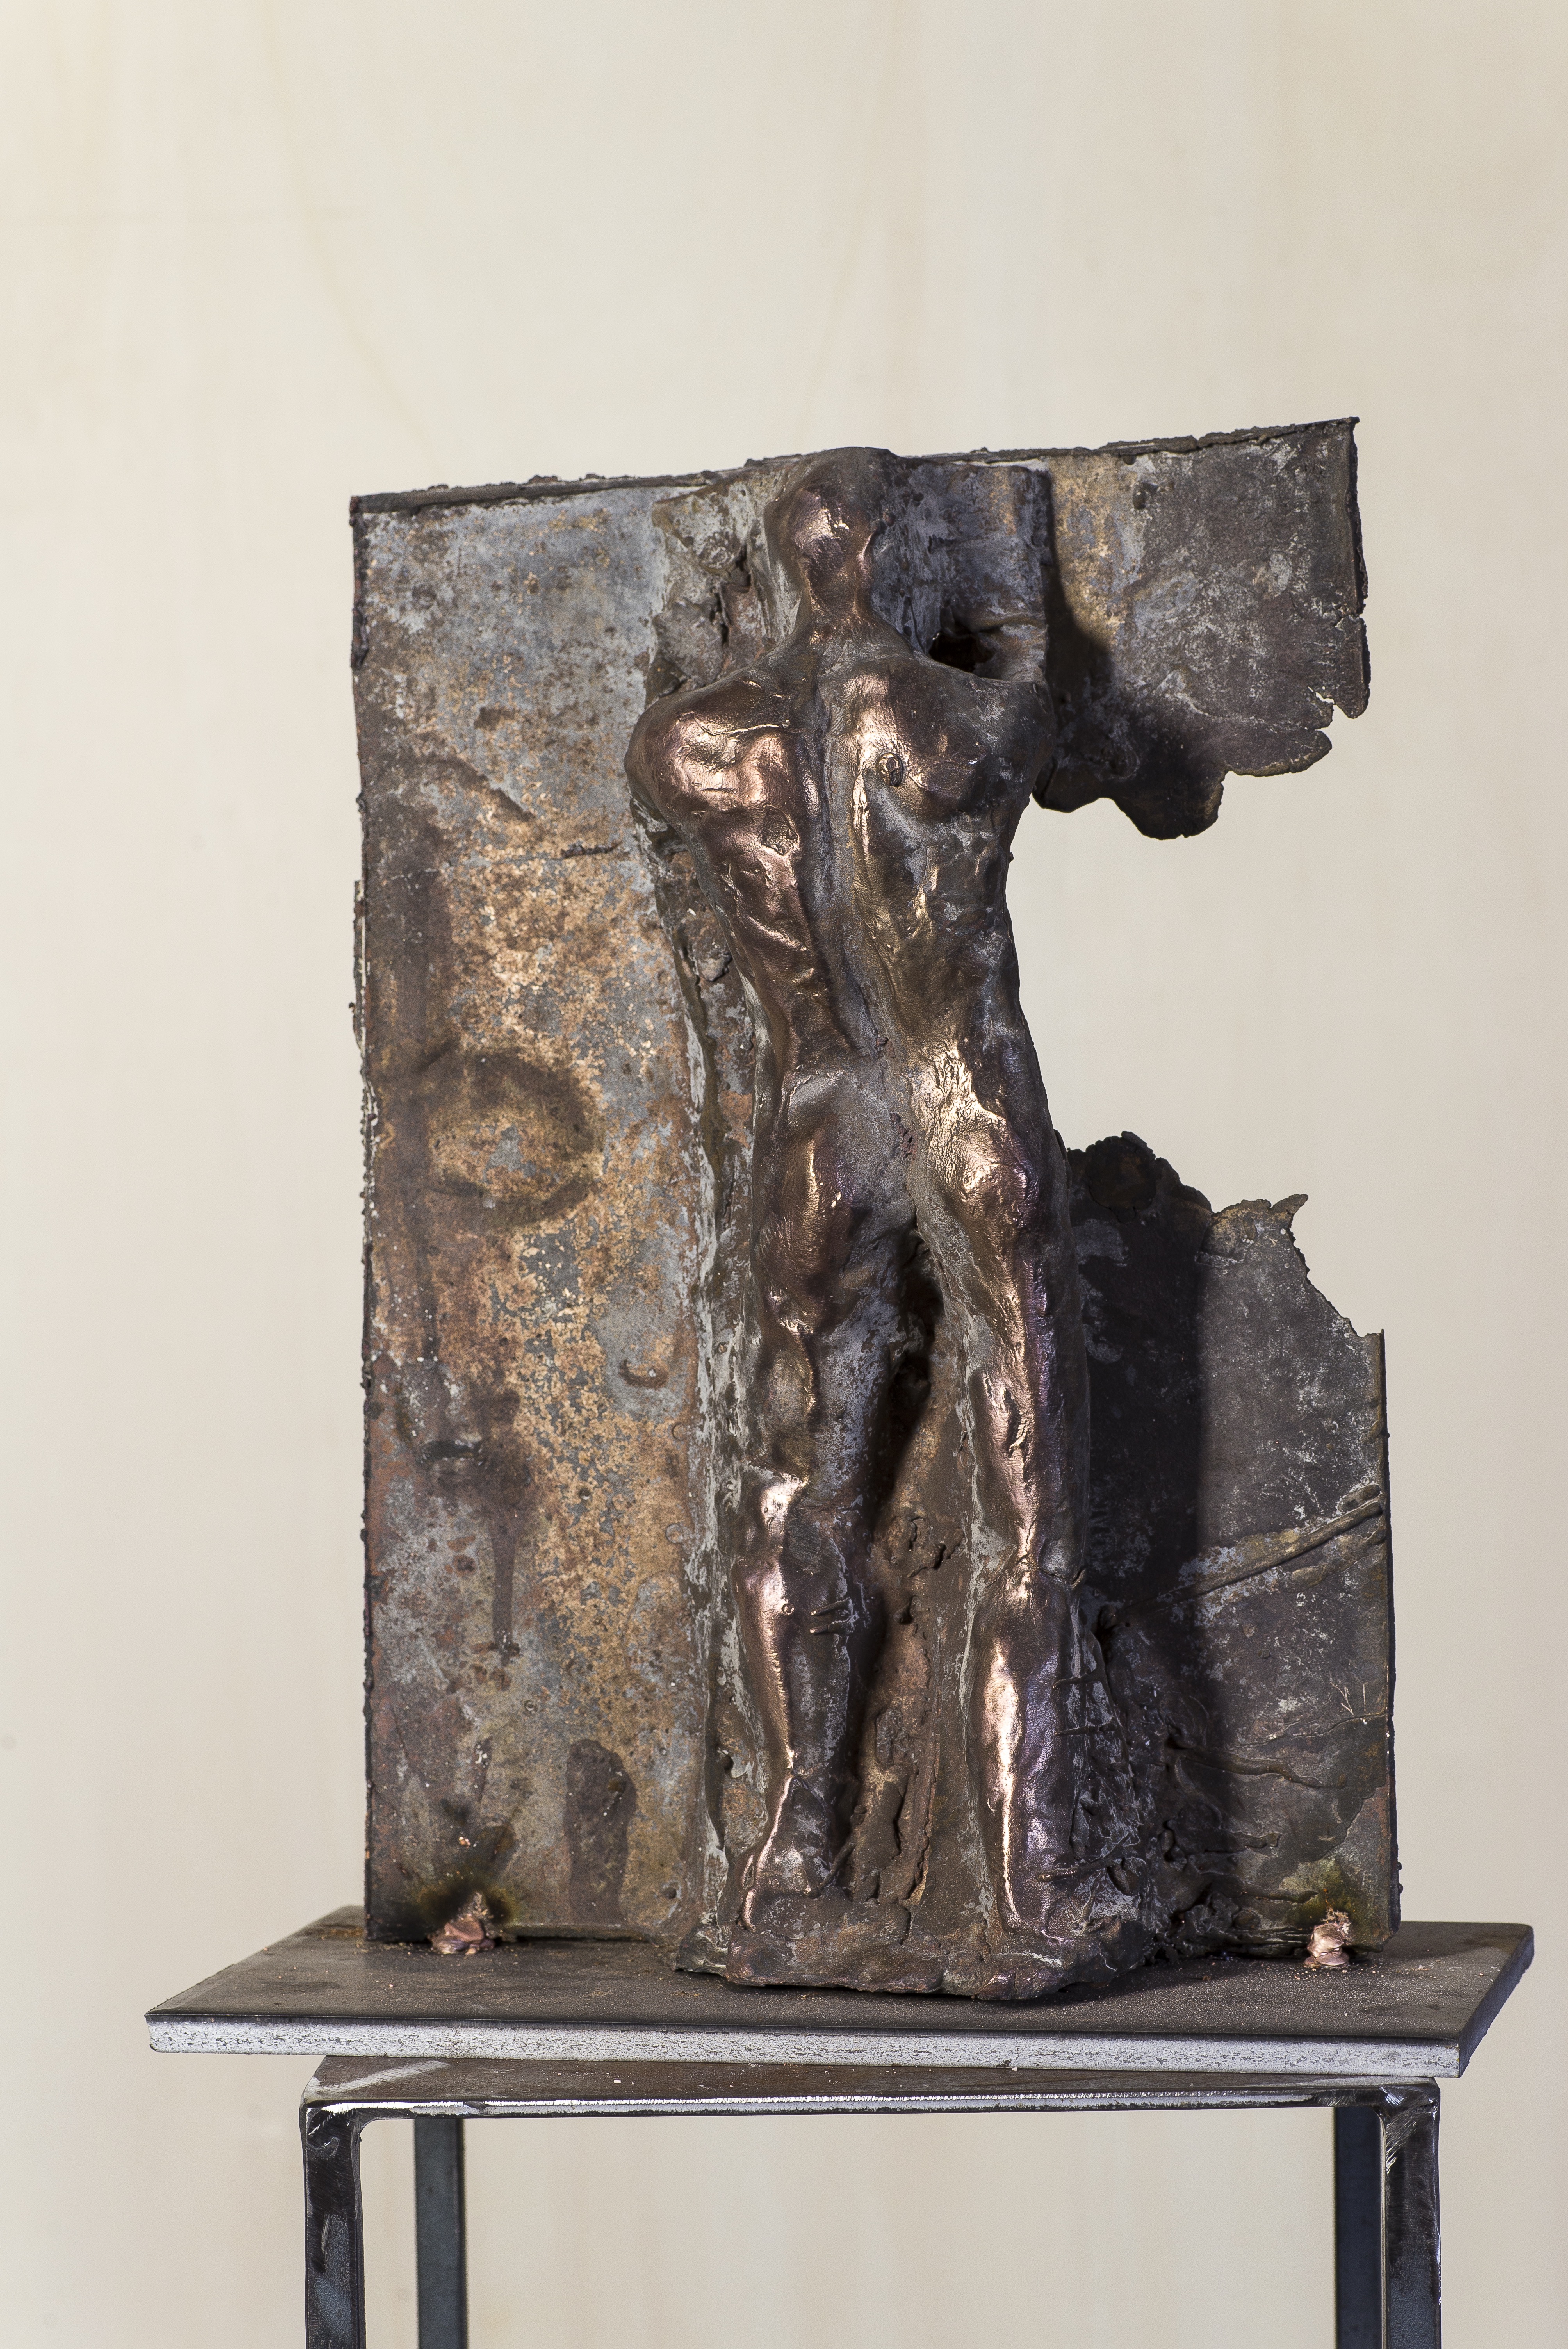 Prisoners#16|bronze |cm36x33x15 |2011 | Rome, Italy |Prvate Collection